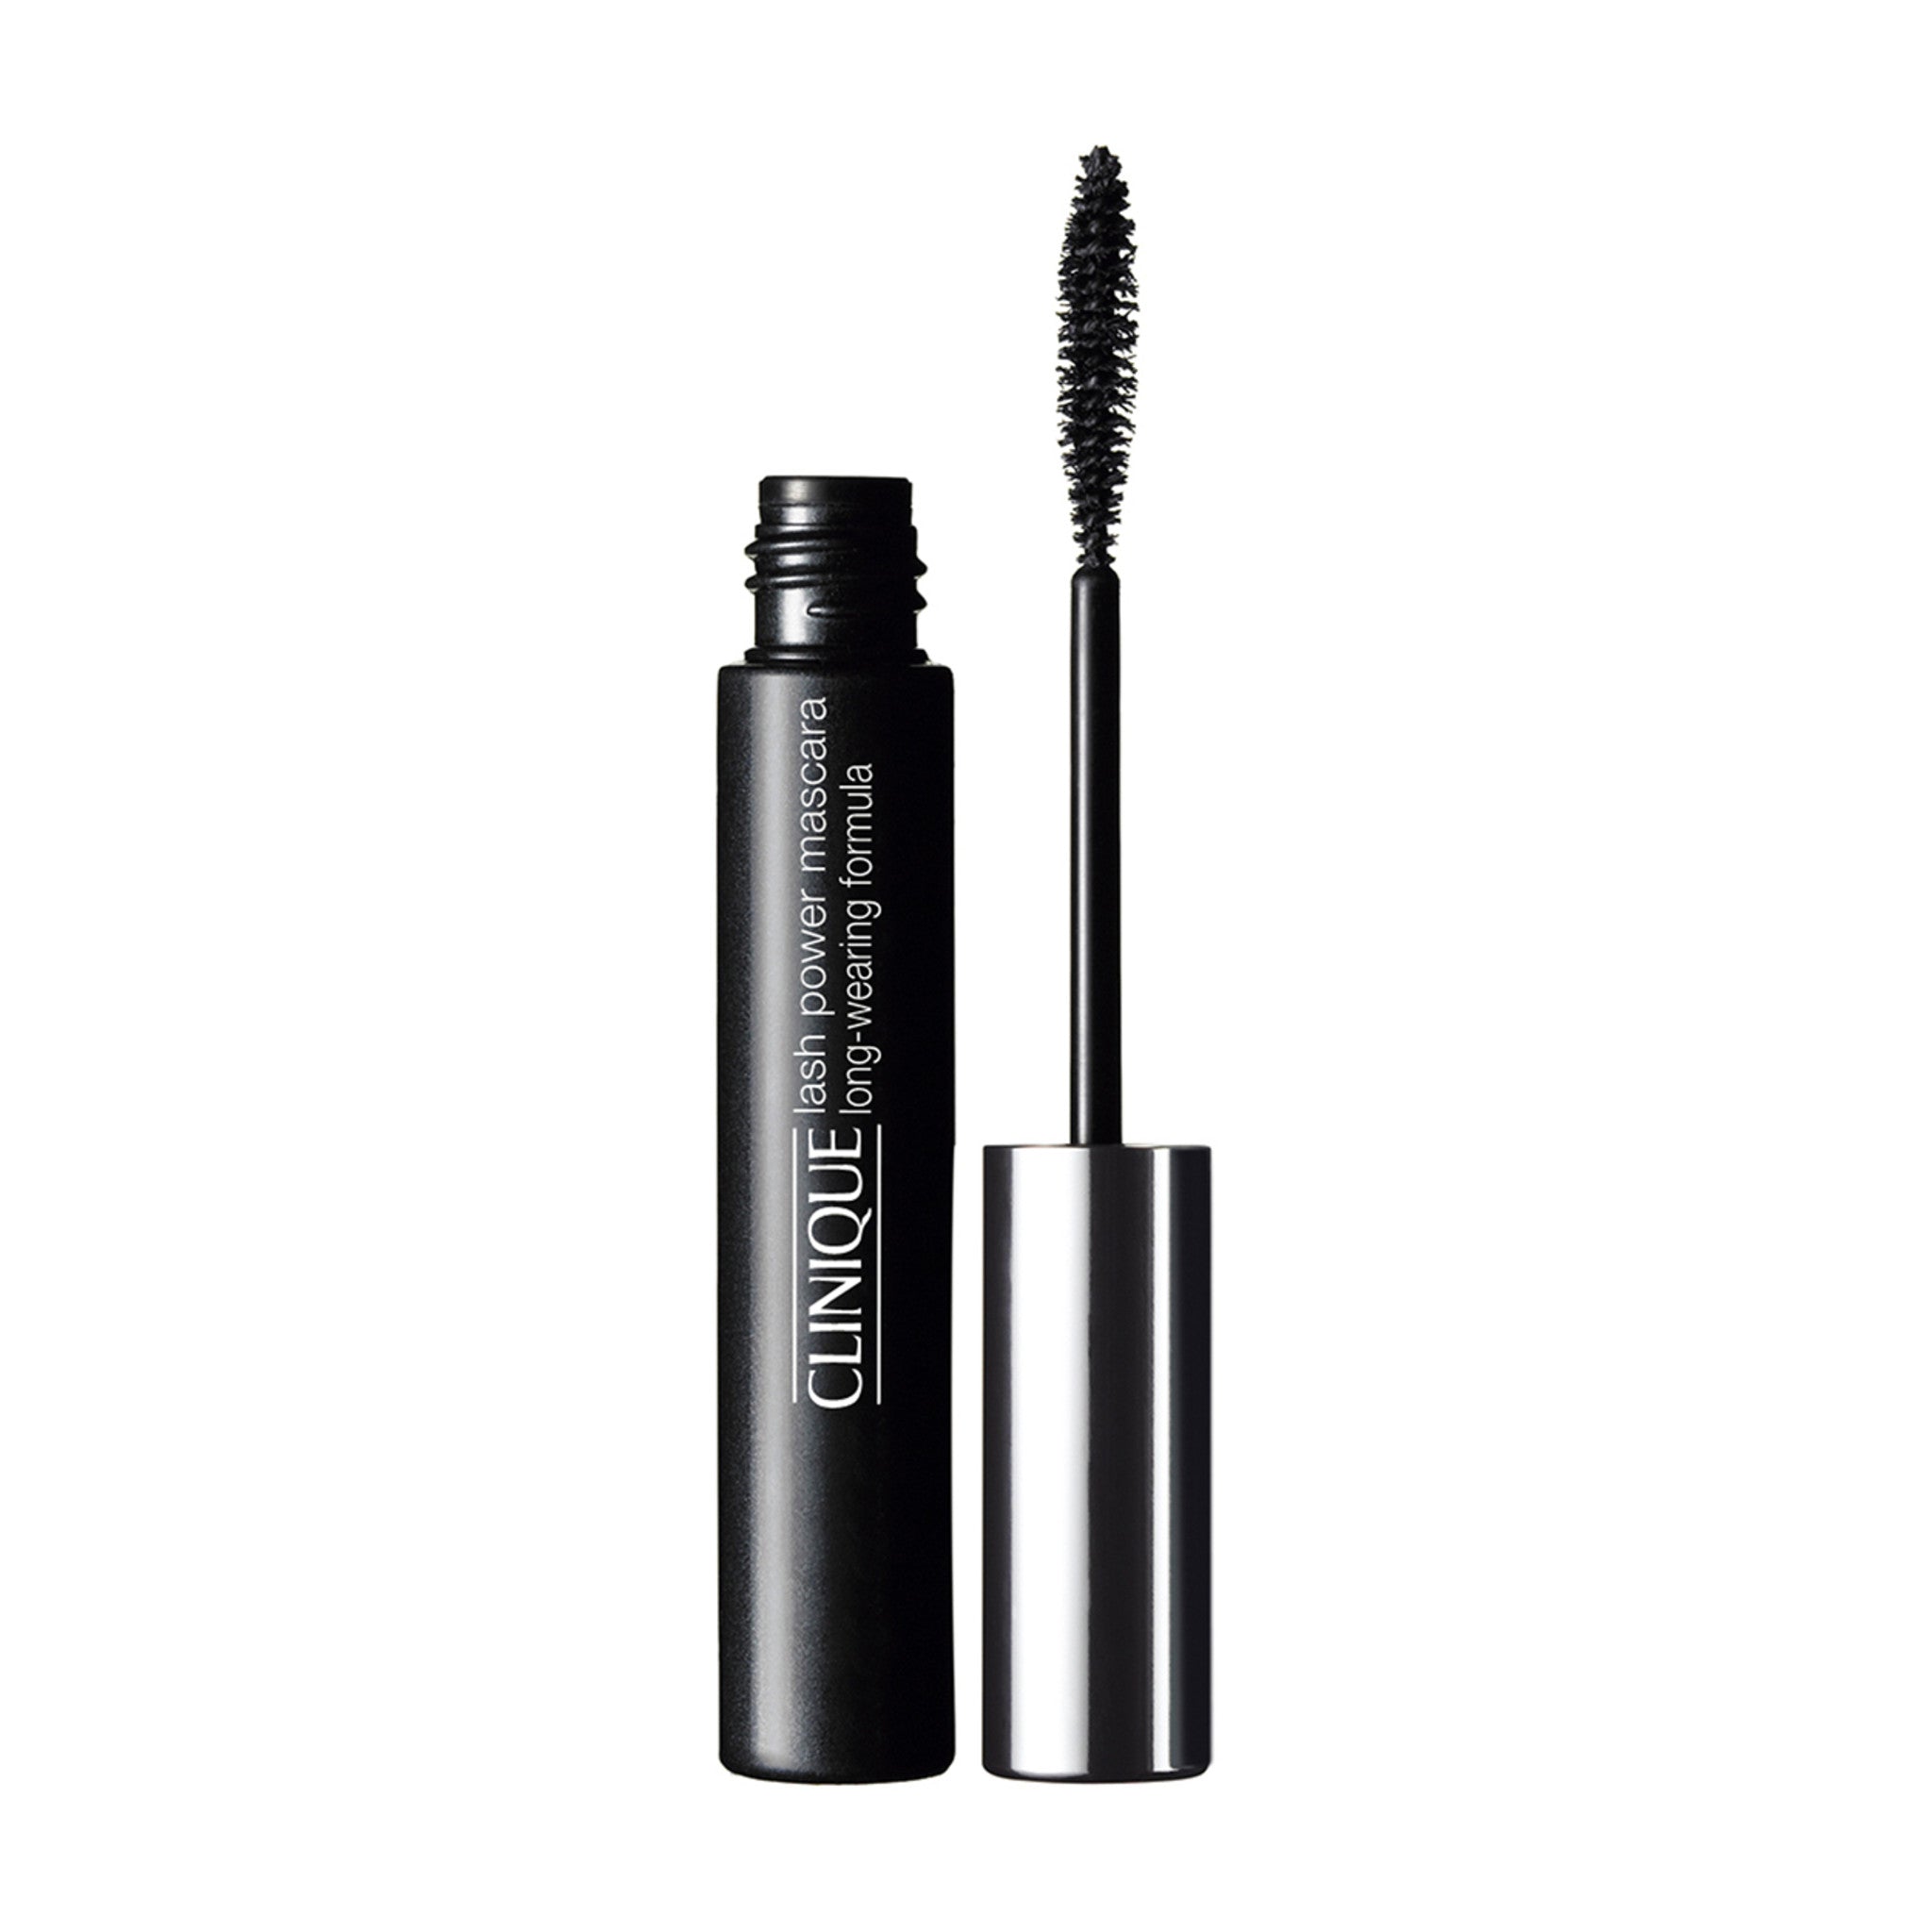 Clinique Lash Power Mascara Color/Shade variant: BLACK ONYX main image. This product is in the color black